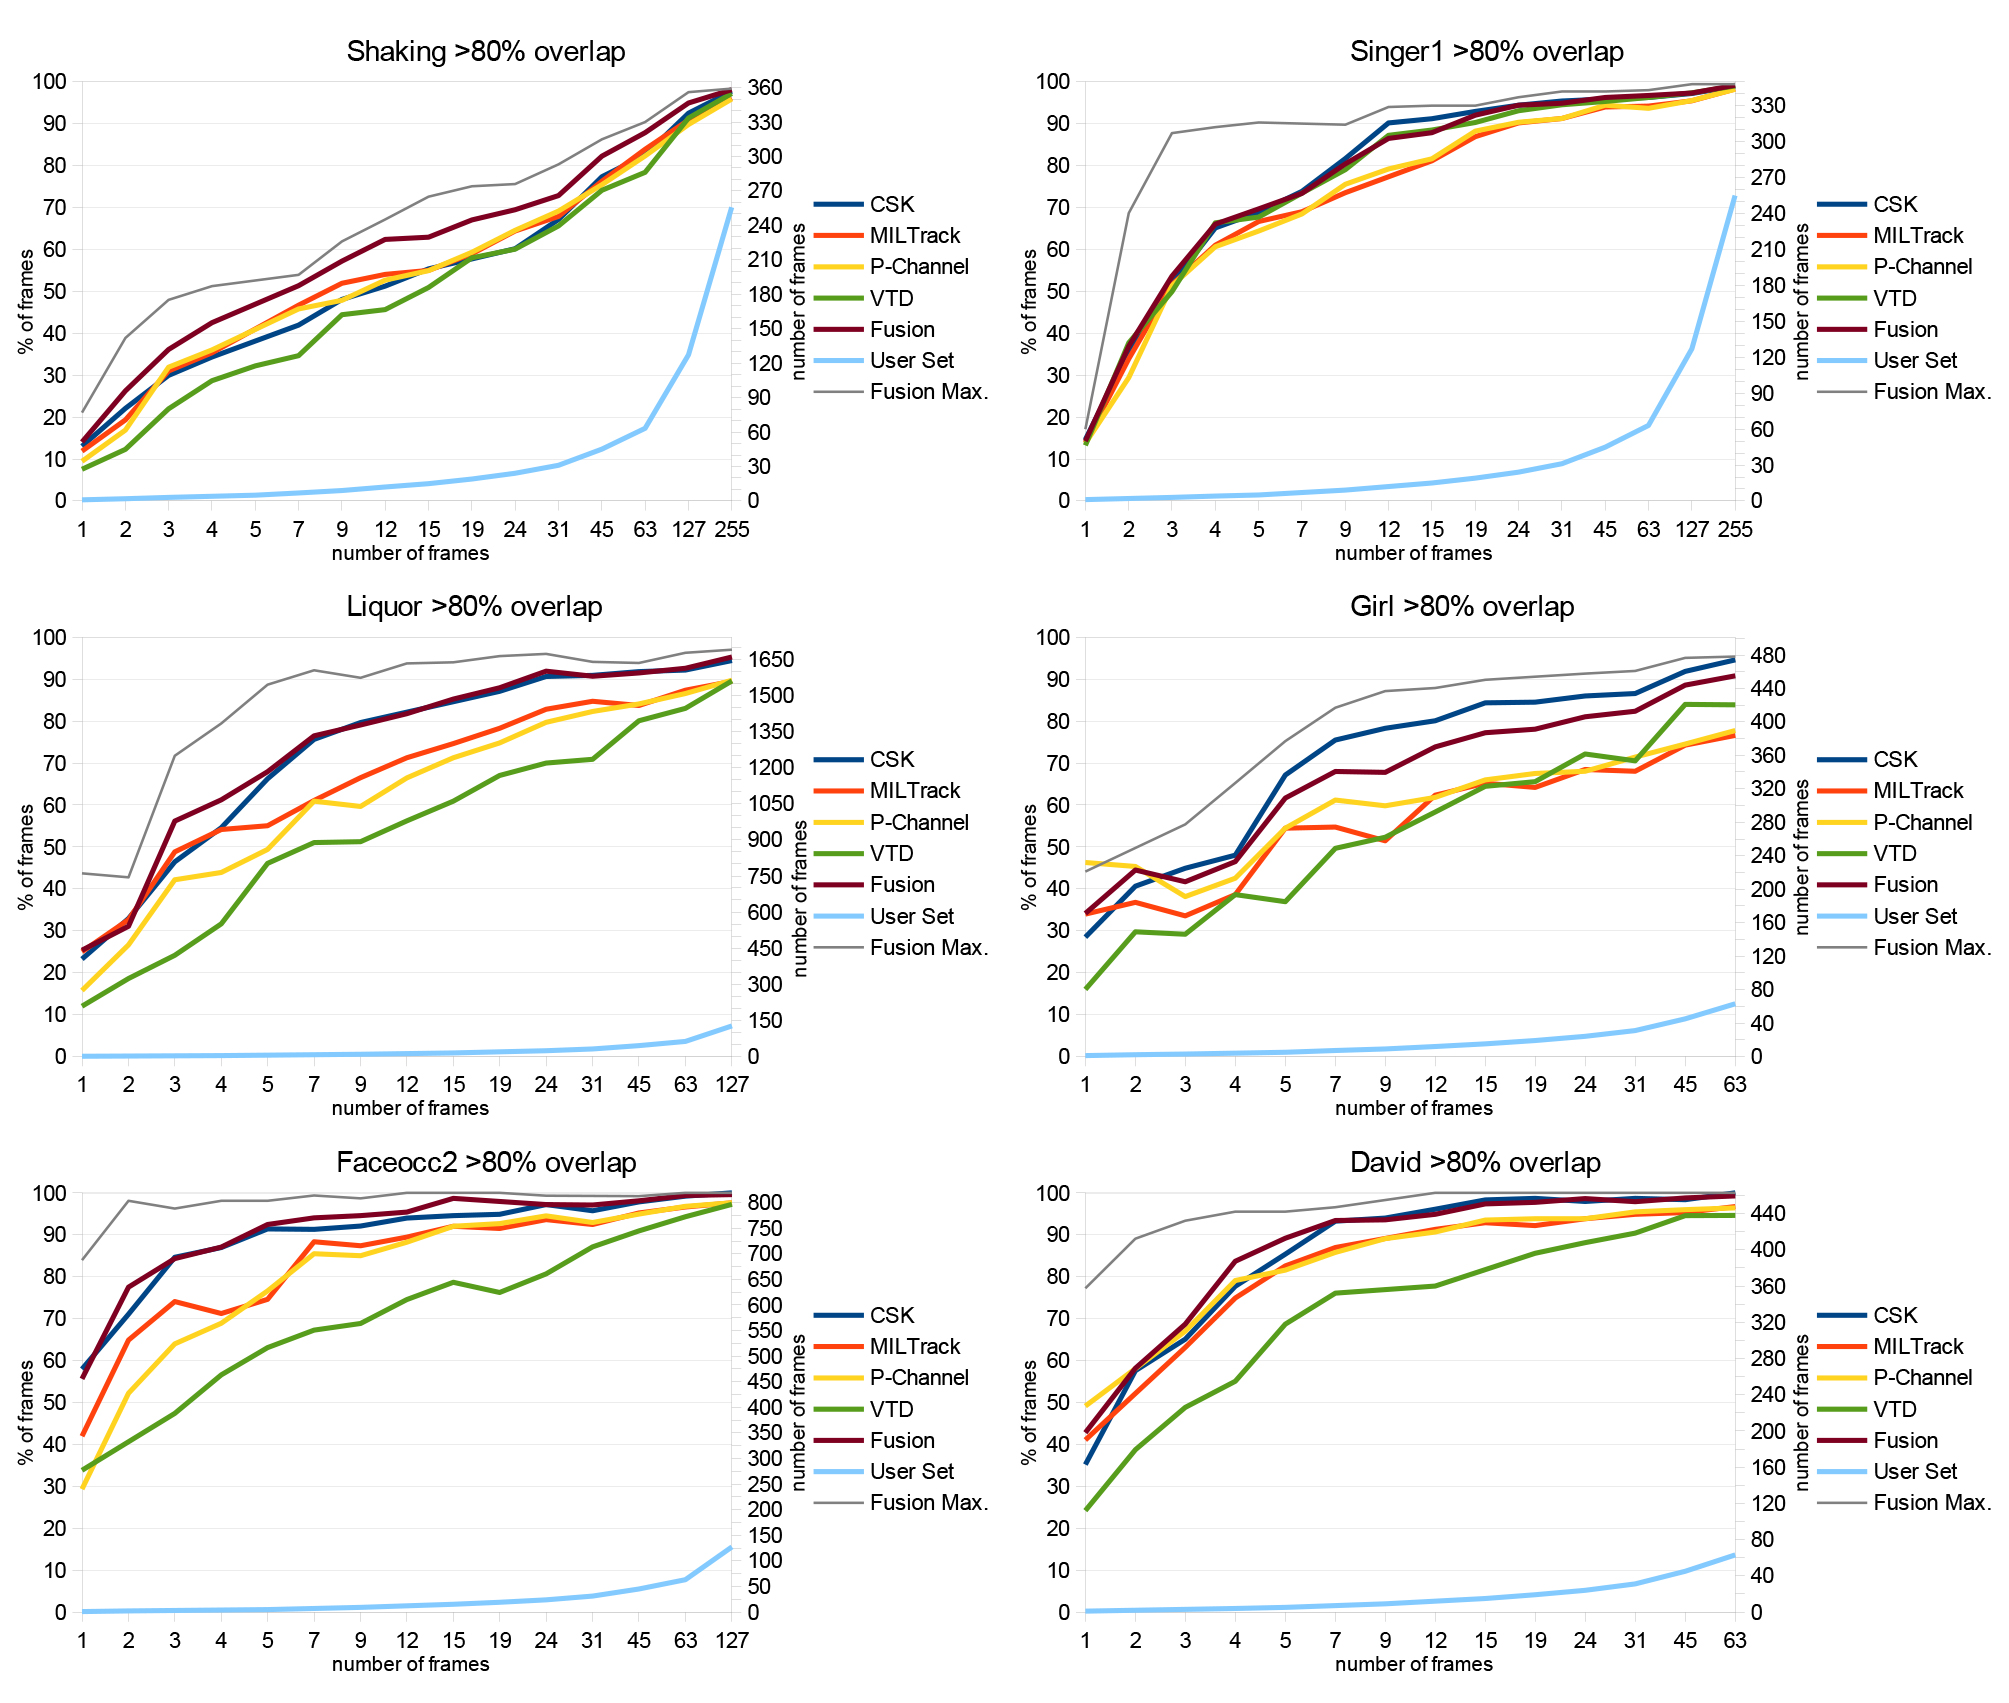 Tracking results for different sequences with different number of simulated user set frames. We performed 8 experiments with different randomly set frames for each tested "number of frames" value. Colored curves show the averages of all 8 experiments. The gray curve shows the maximum of the 8 experiments. It should be closer to a human selection than the average. See text for details.